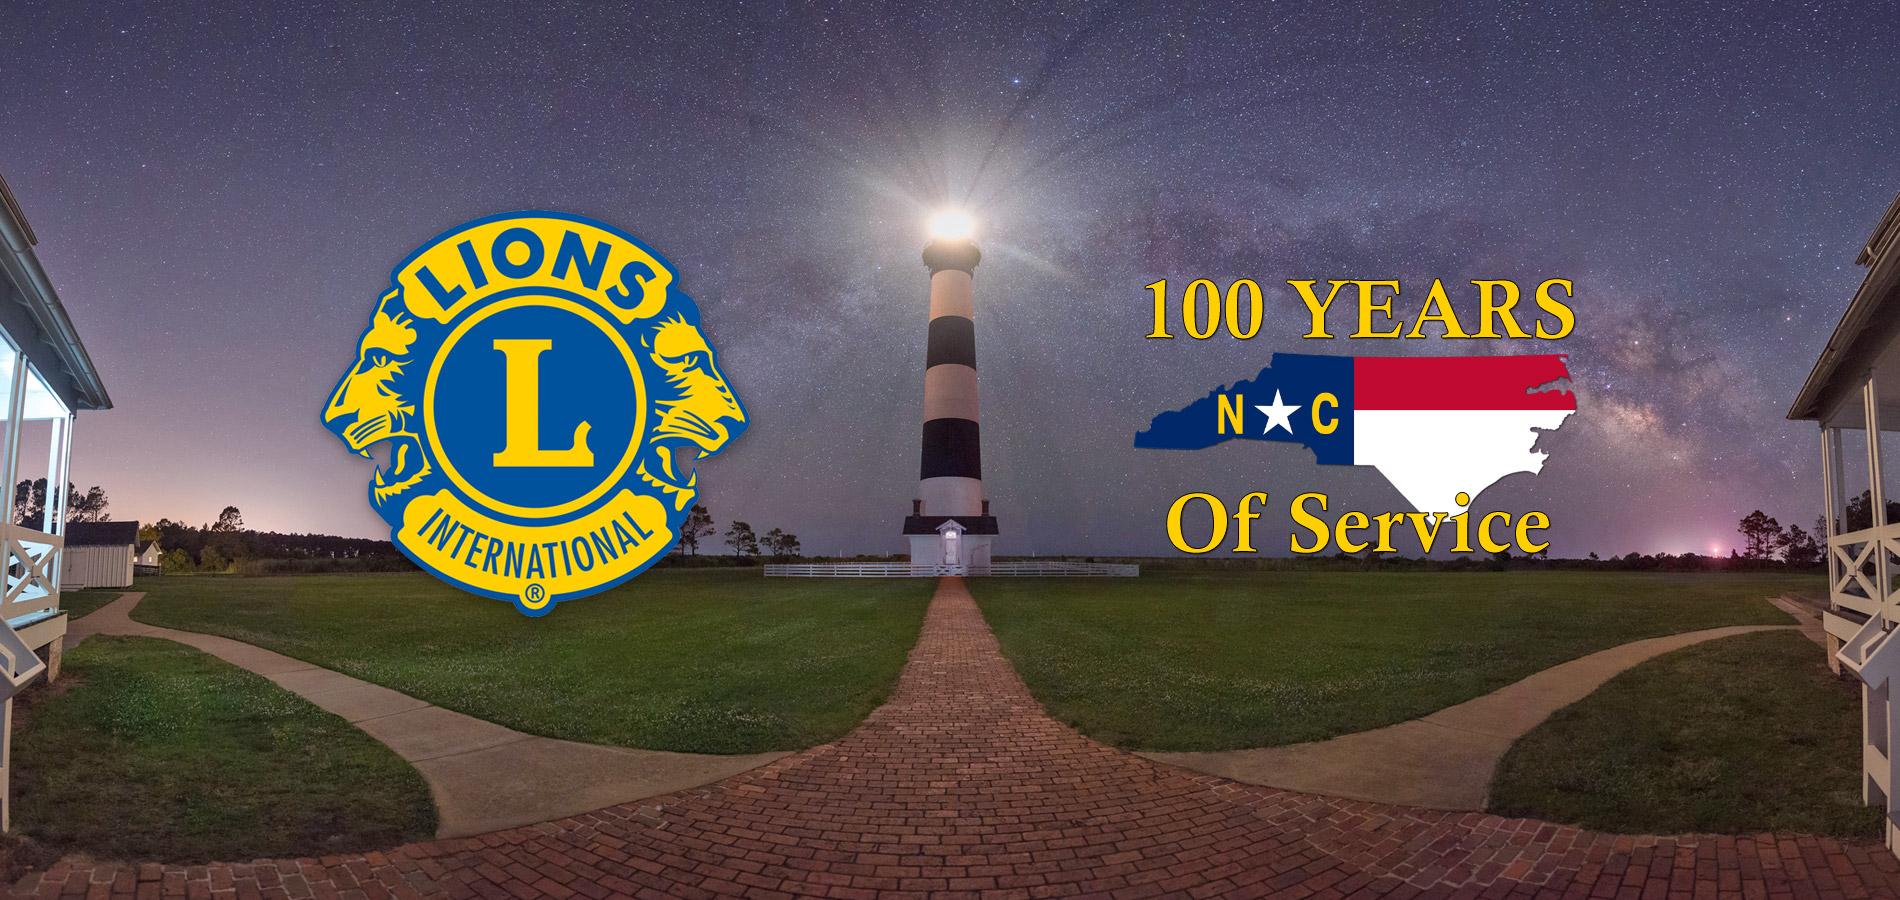 multiple district 31 lions clubs north carolina state council of governors